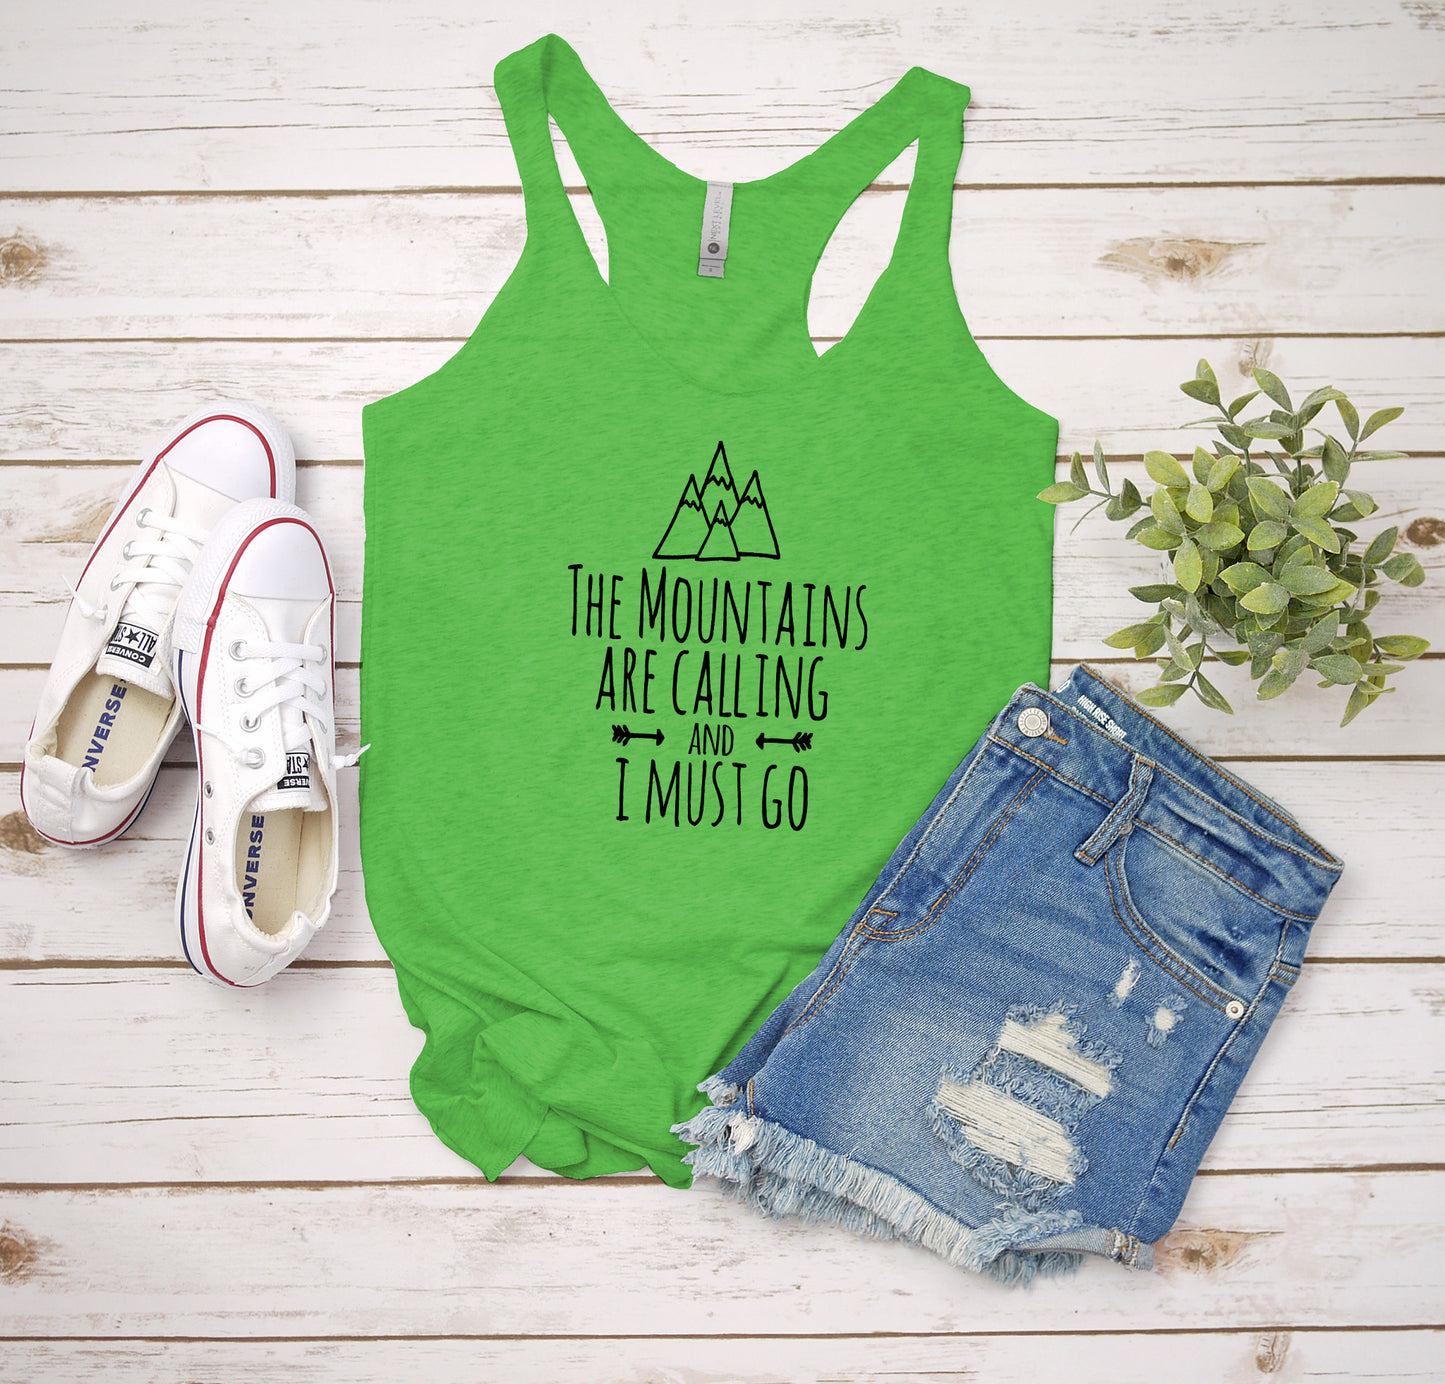 The Mountains Are Calling And I Must Go - Women's Tank - Heather Gray, Tahiti, or Envy